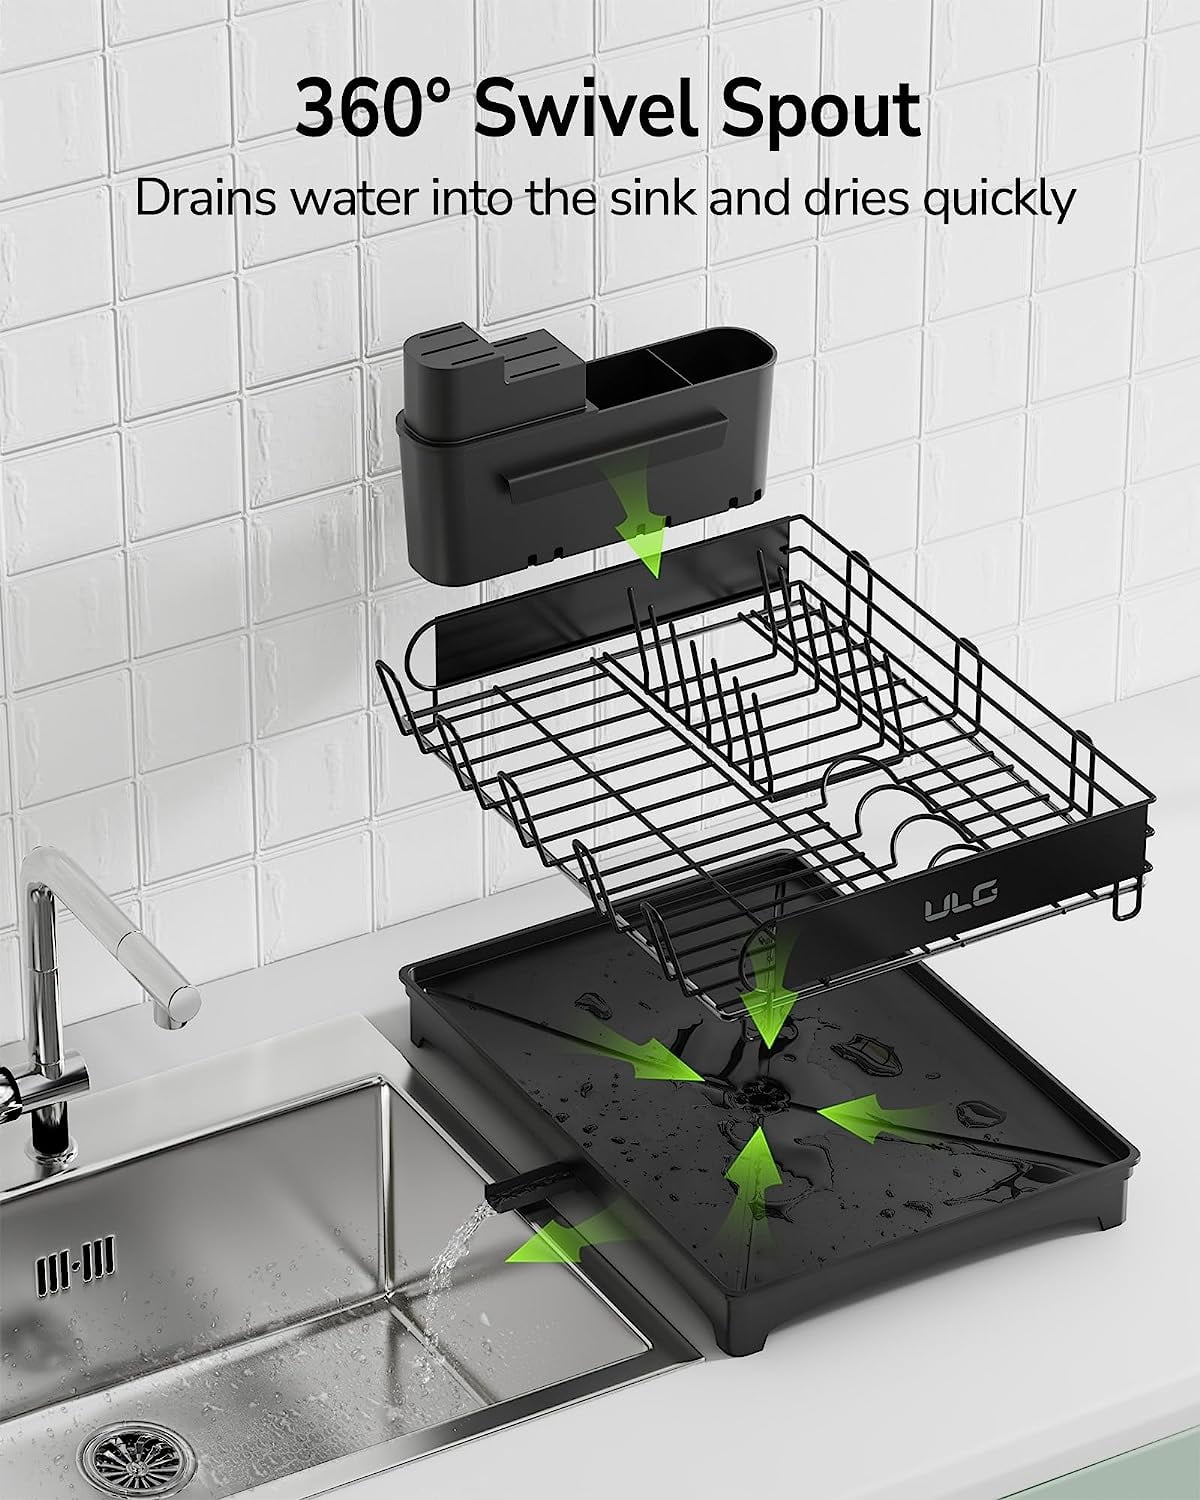 Lwithszg Dish Drying Rack, Plastic Compact Dish Rack and Drainboard Set, Sink Dish Drainer with Cup Holder Utensil Holder for Kitchen Counter, Green